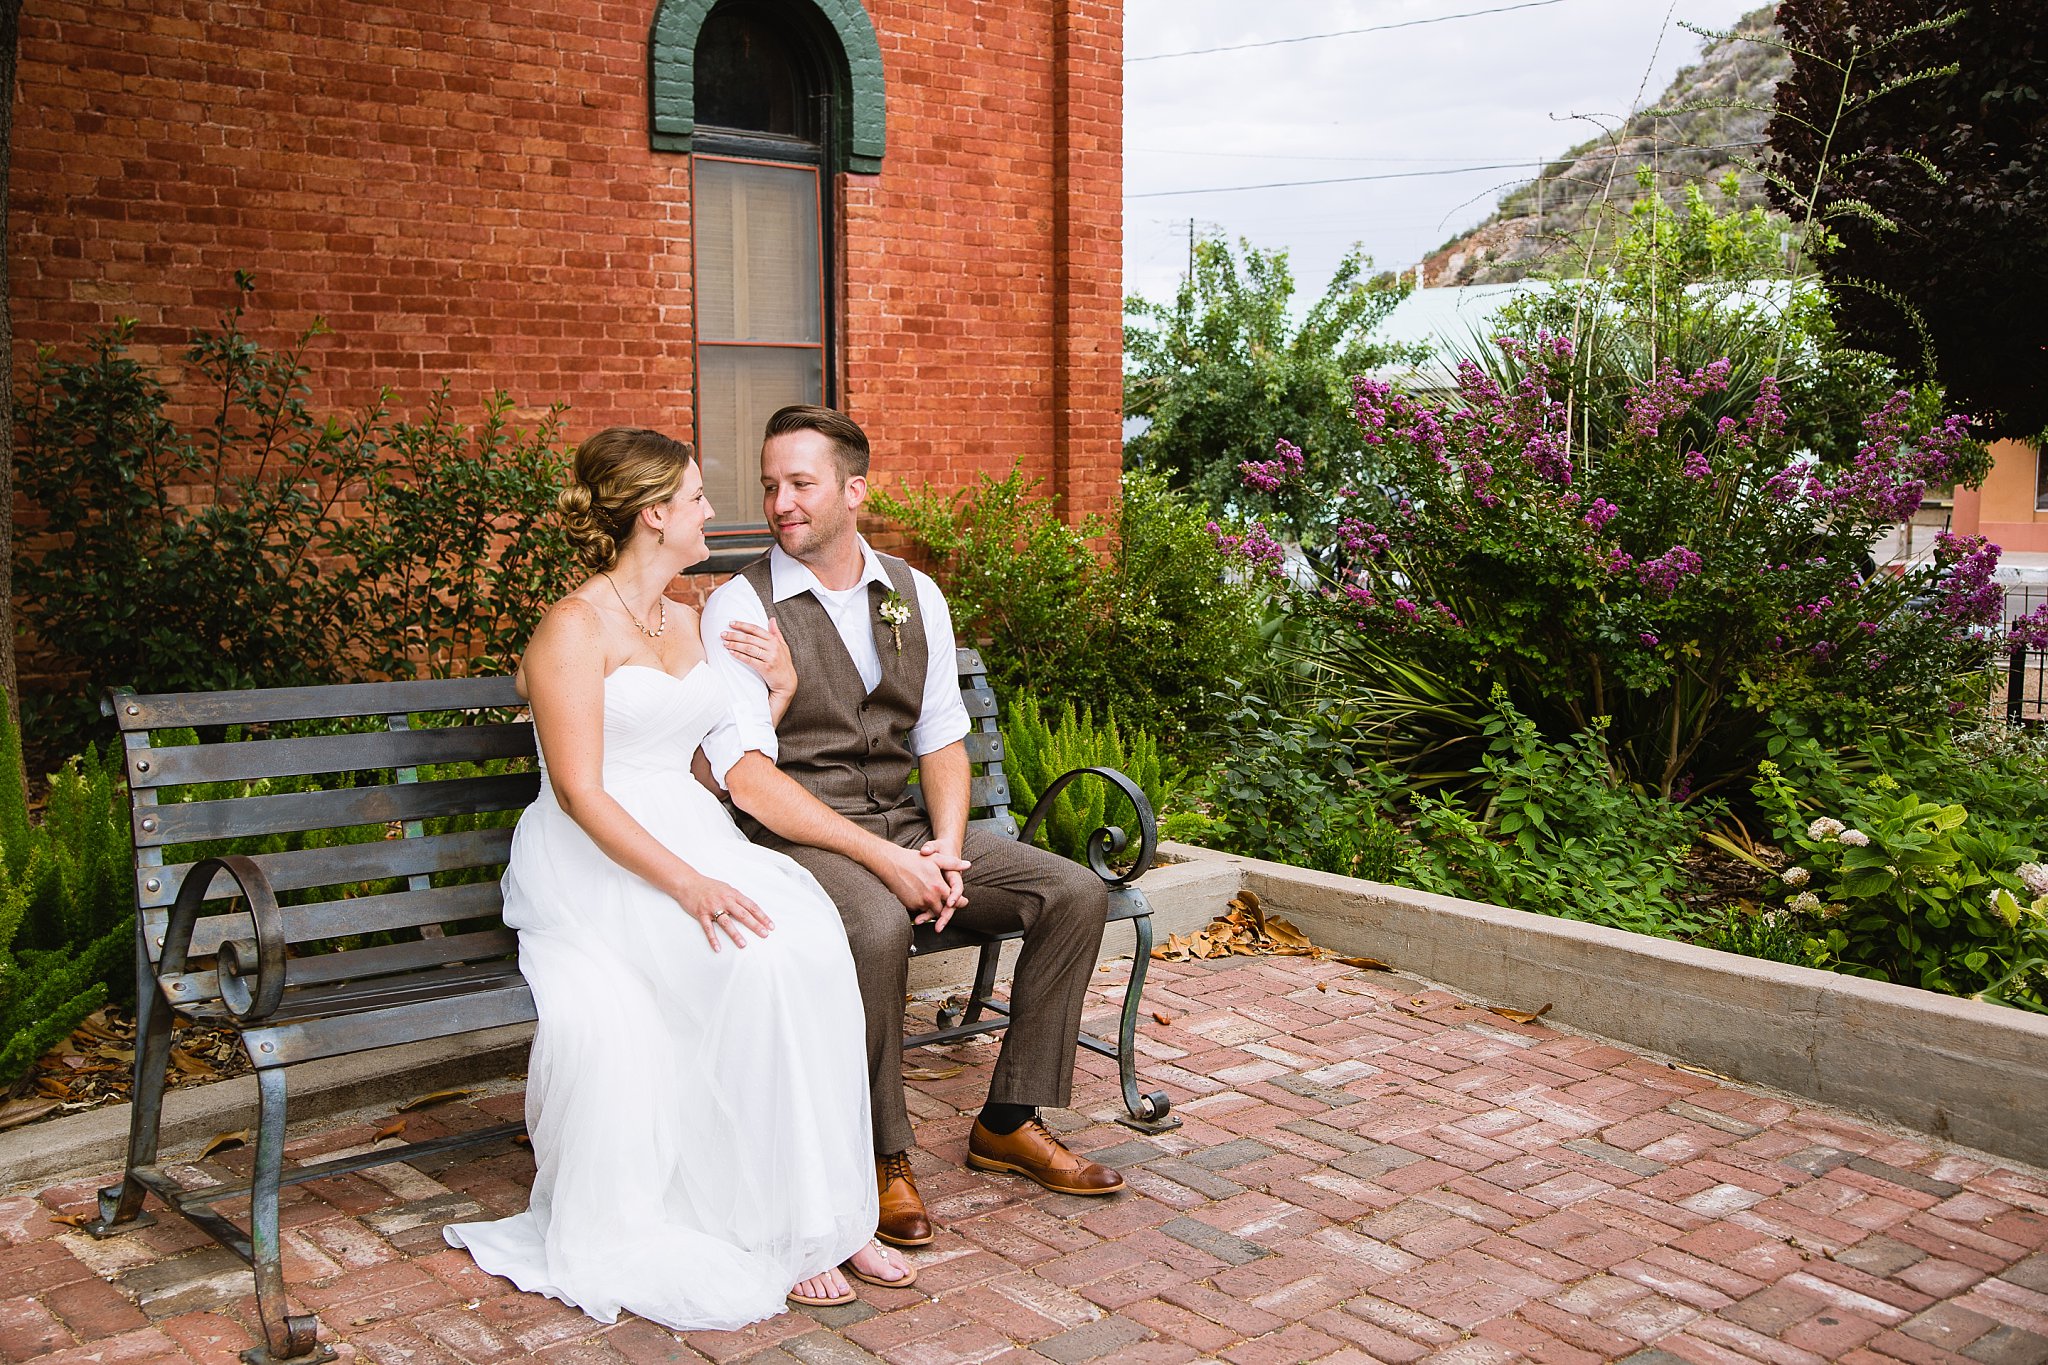 Bride and Groom at a historic garden in Bisbee Arizona by PMA Photography